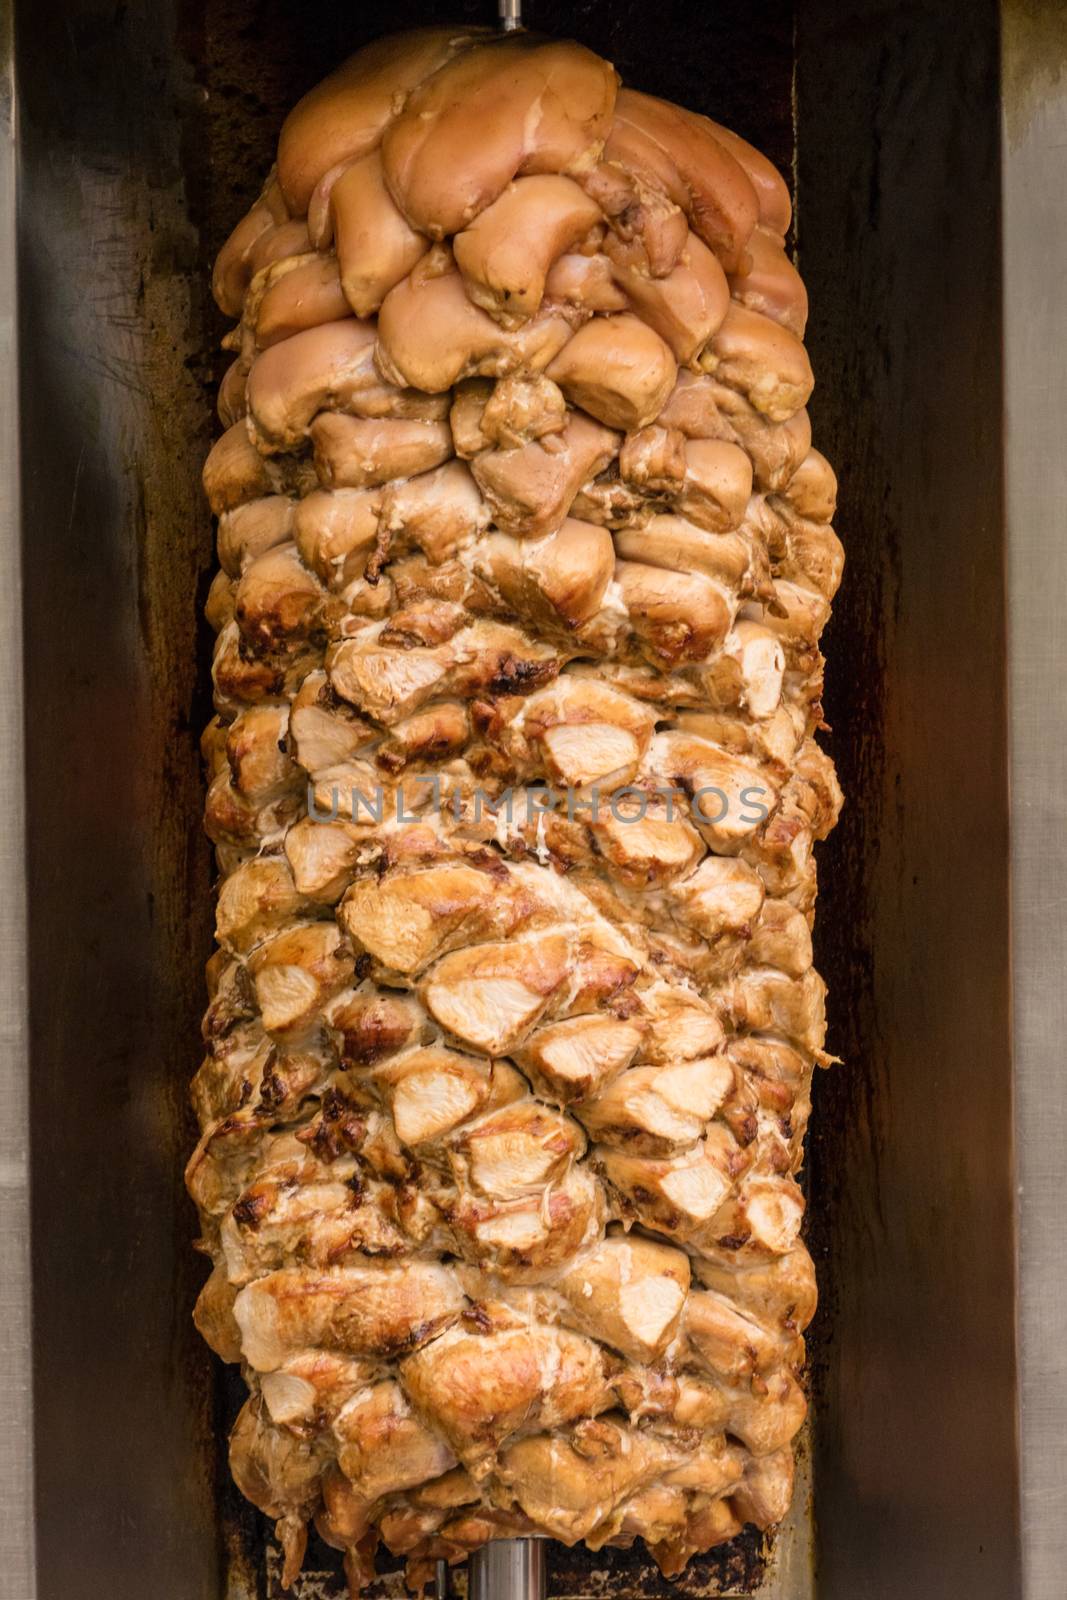 Shawarma being prepared on a spit